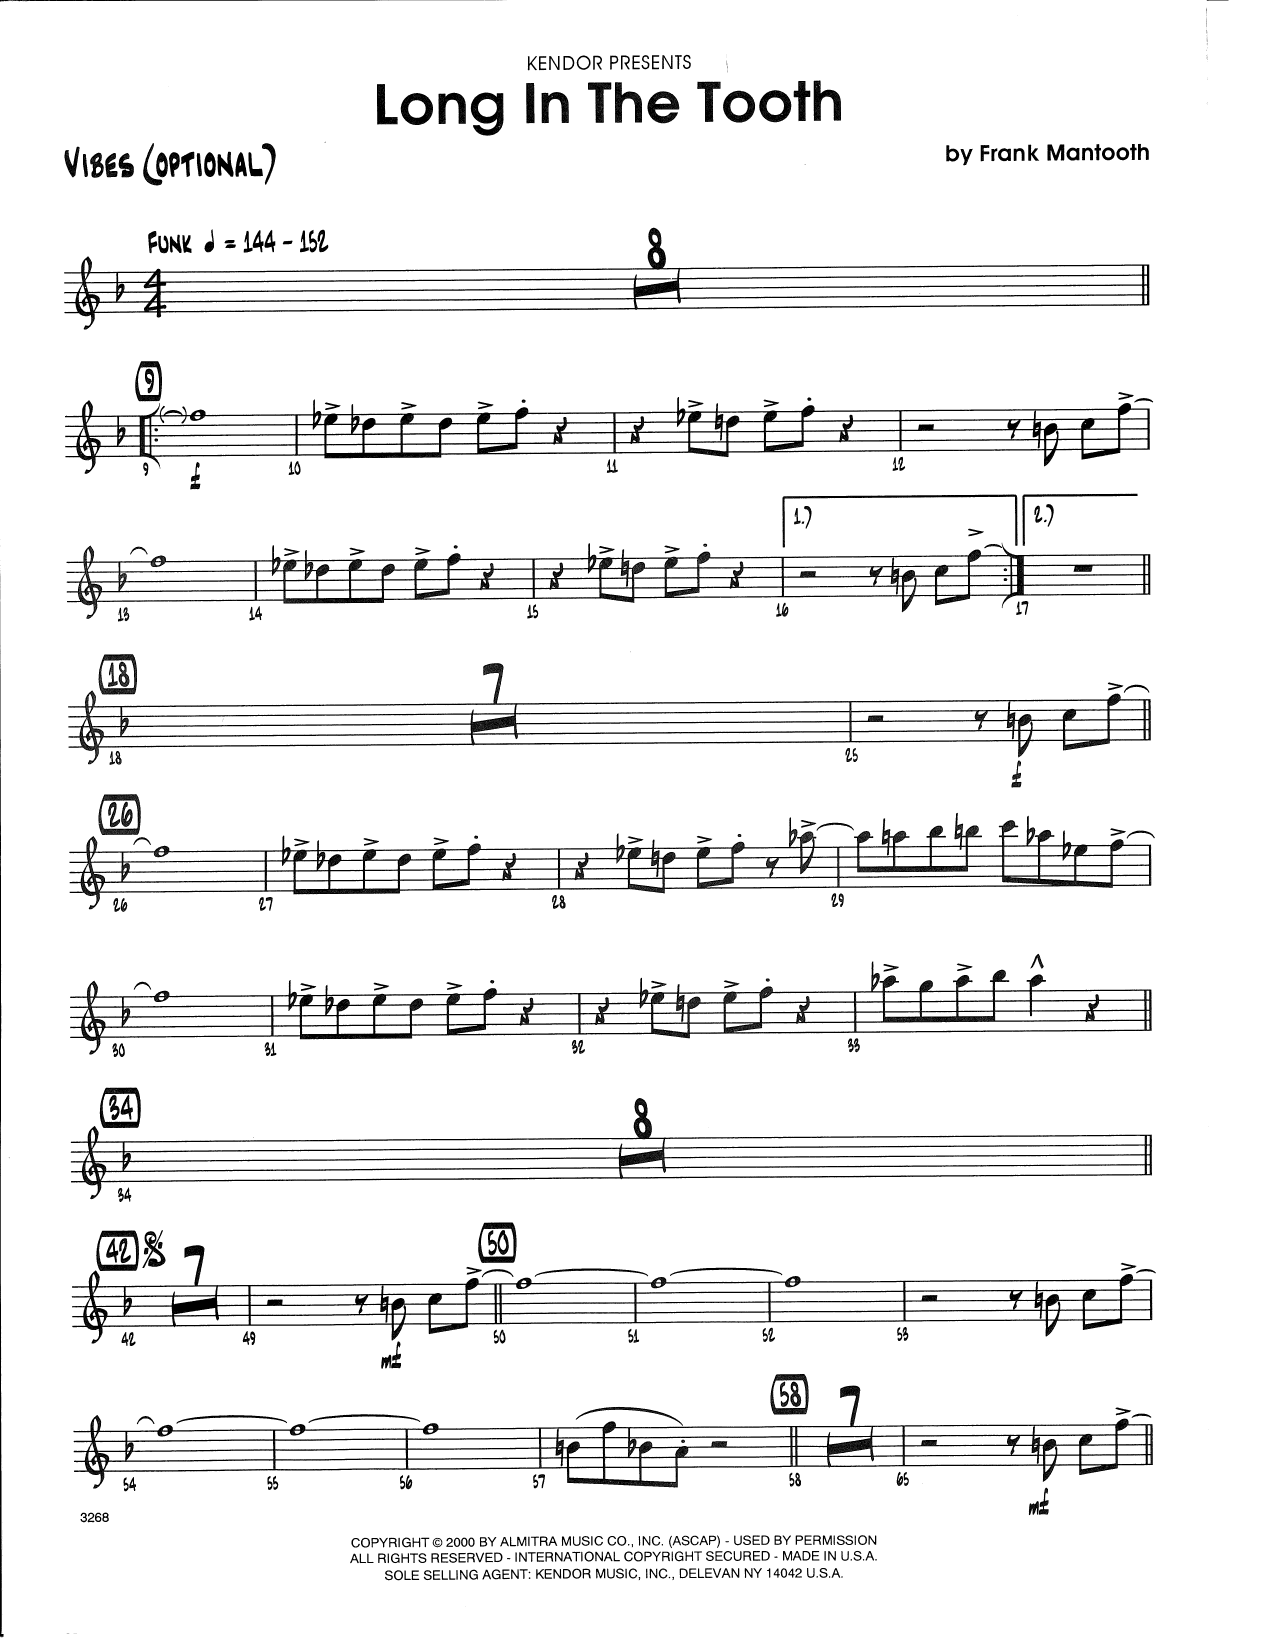 Download Frank Mantooth Long In The Tooth - Vibes Sheet Music